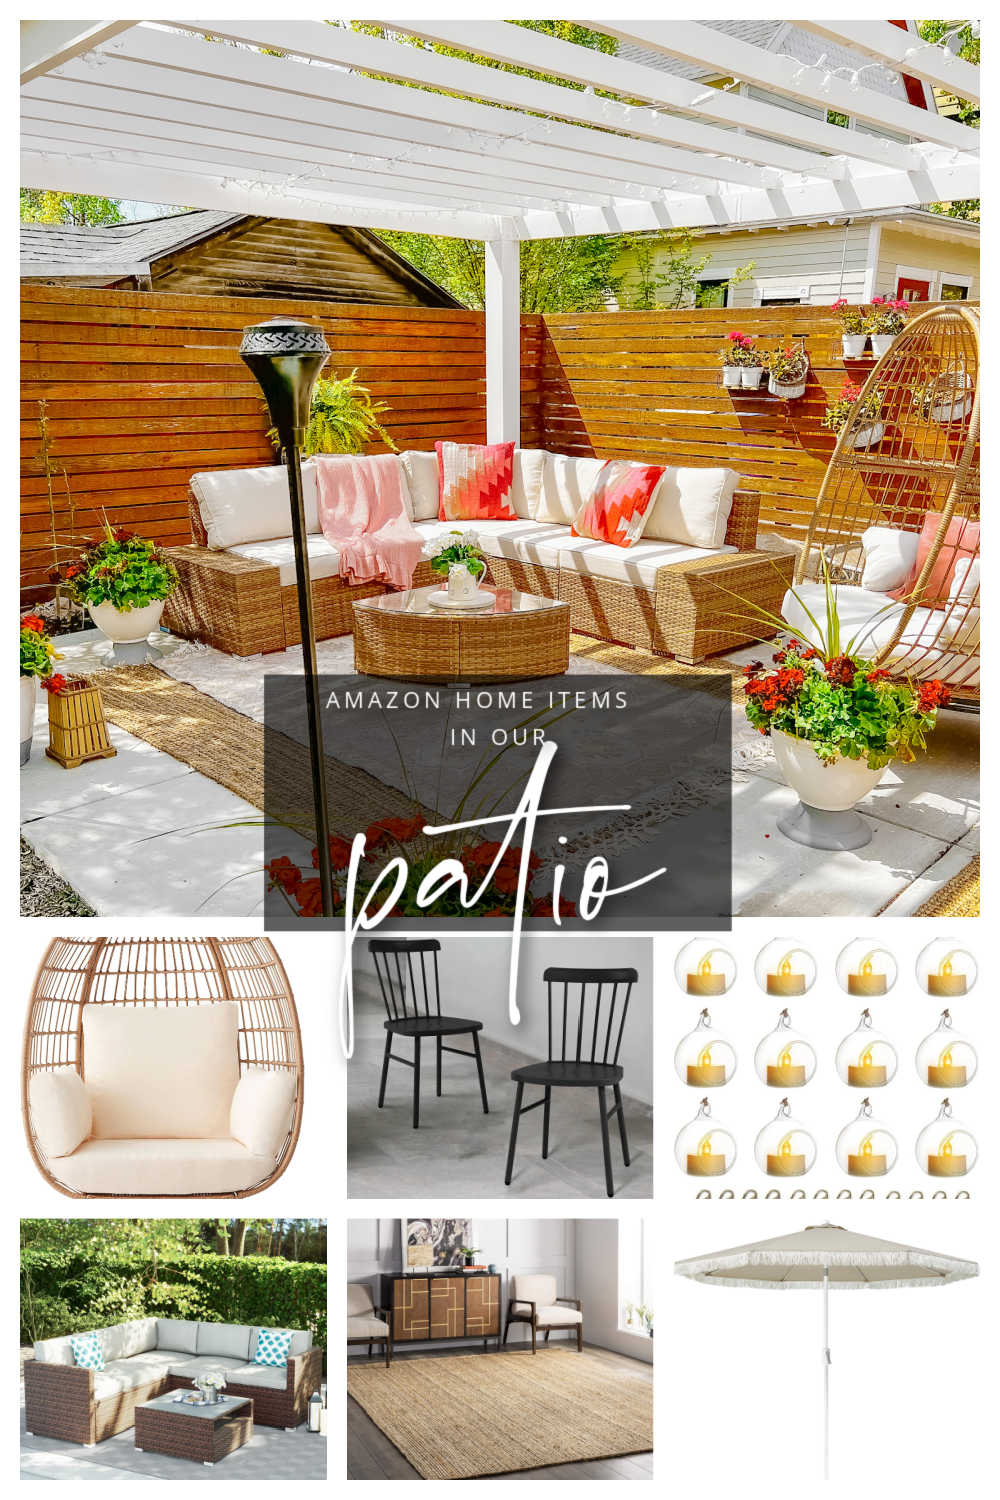 Amazon Items I Love in Our Home. Amazon is a great source for everything home, especially for SUMMER! Today I am sharing my favorite amazon items that we love in our 1891 home!